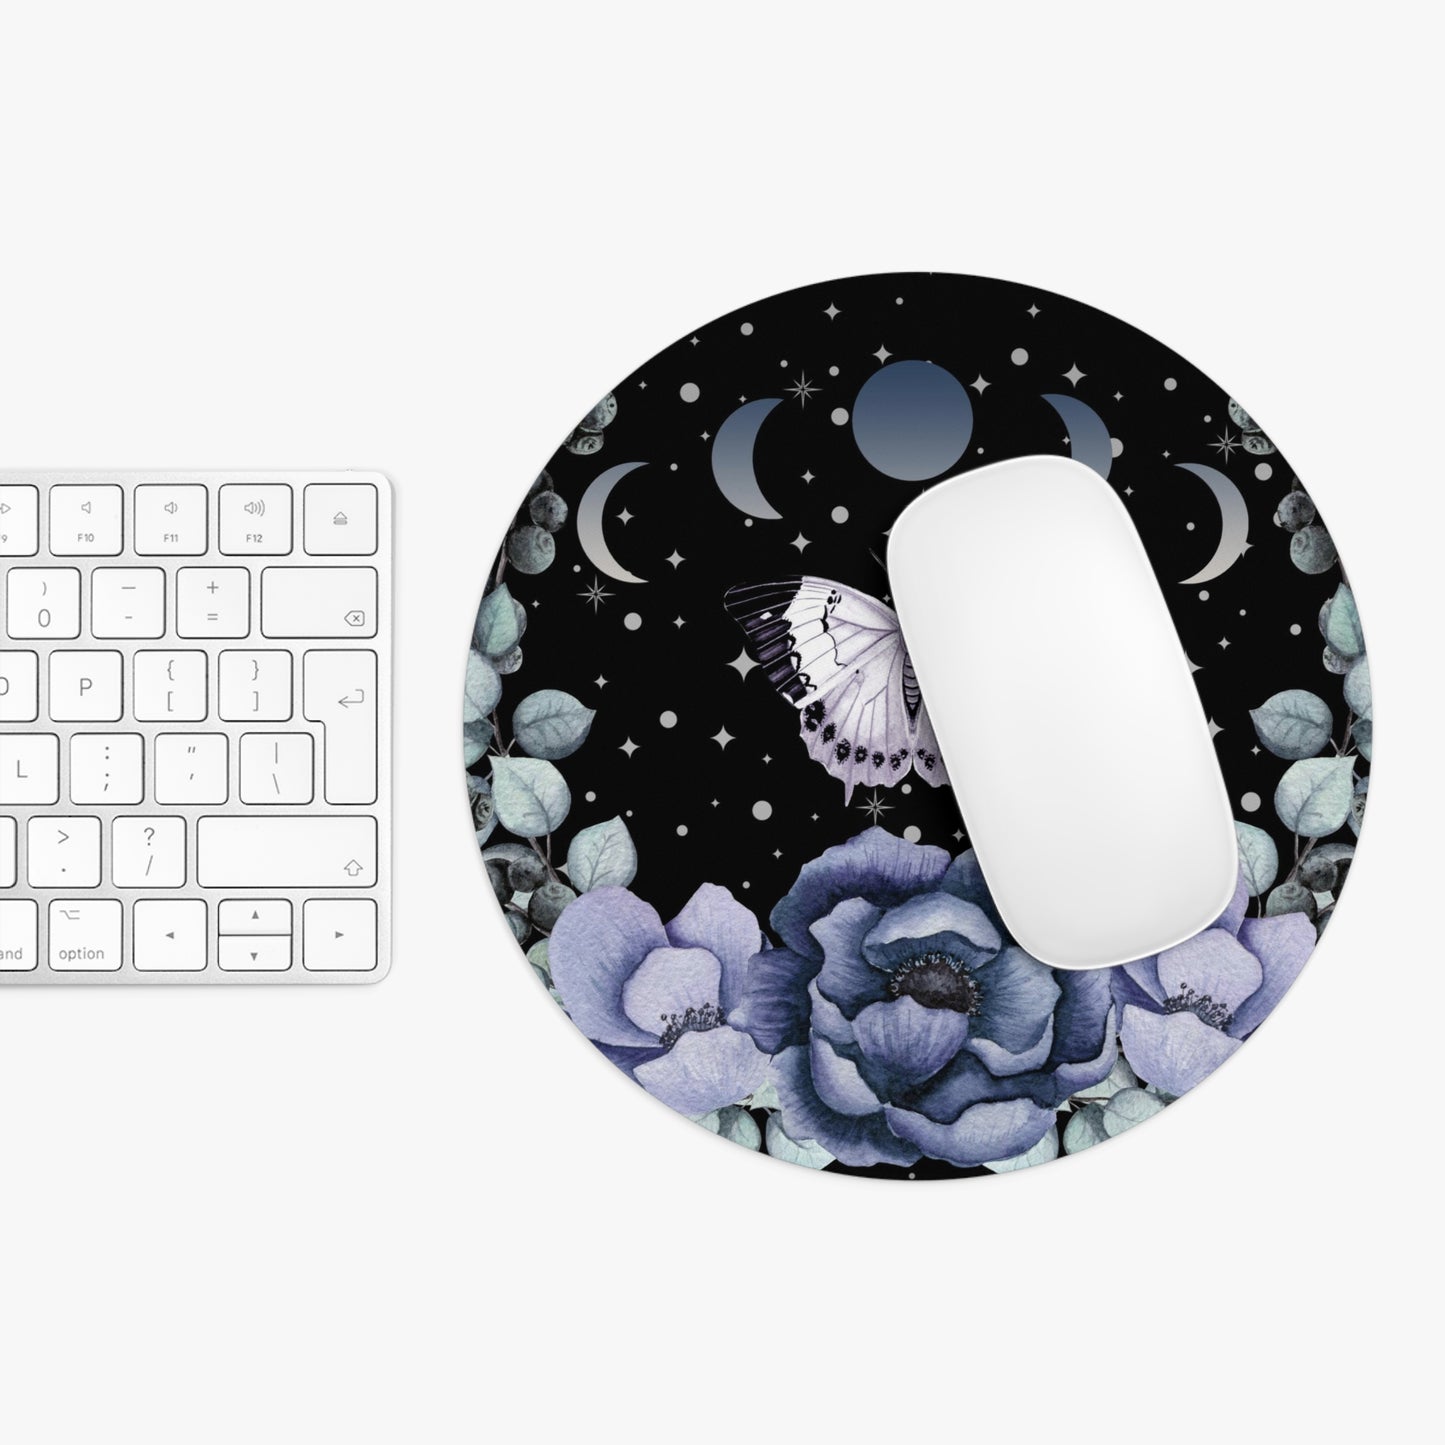 Twilight Butterfly Floral Round Mouse Pad